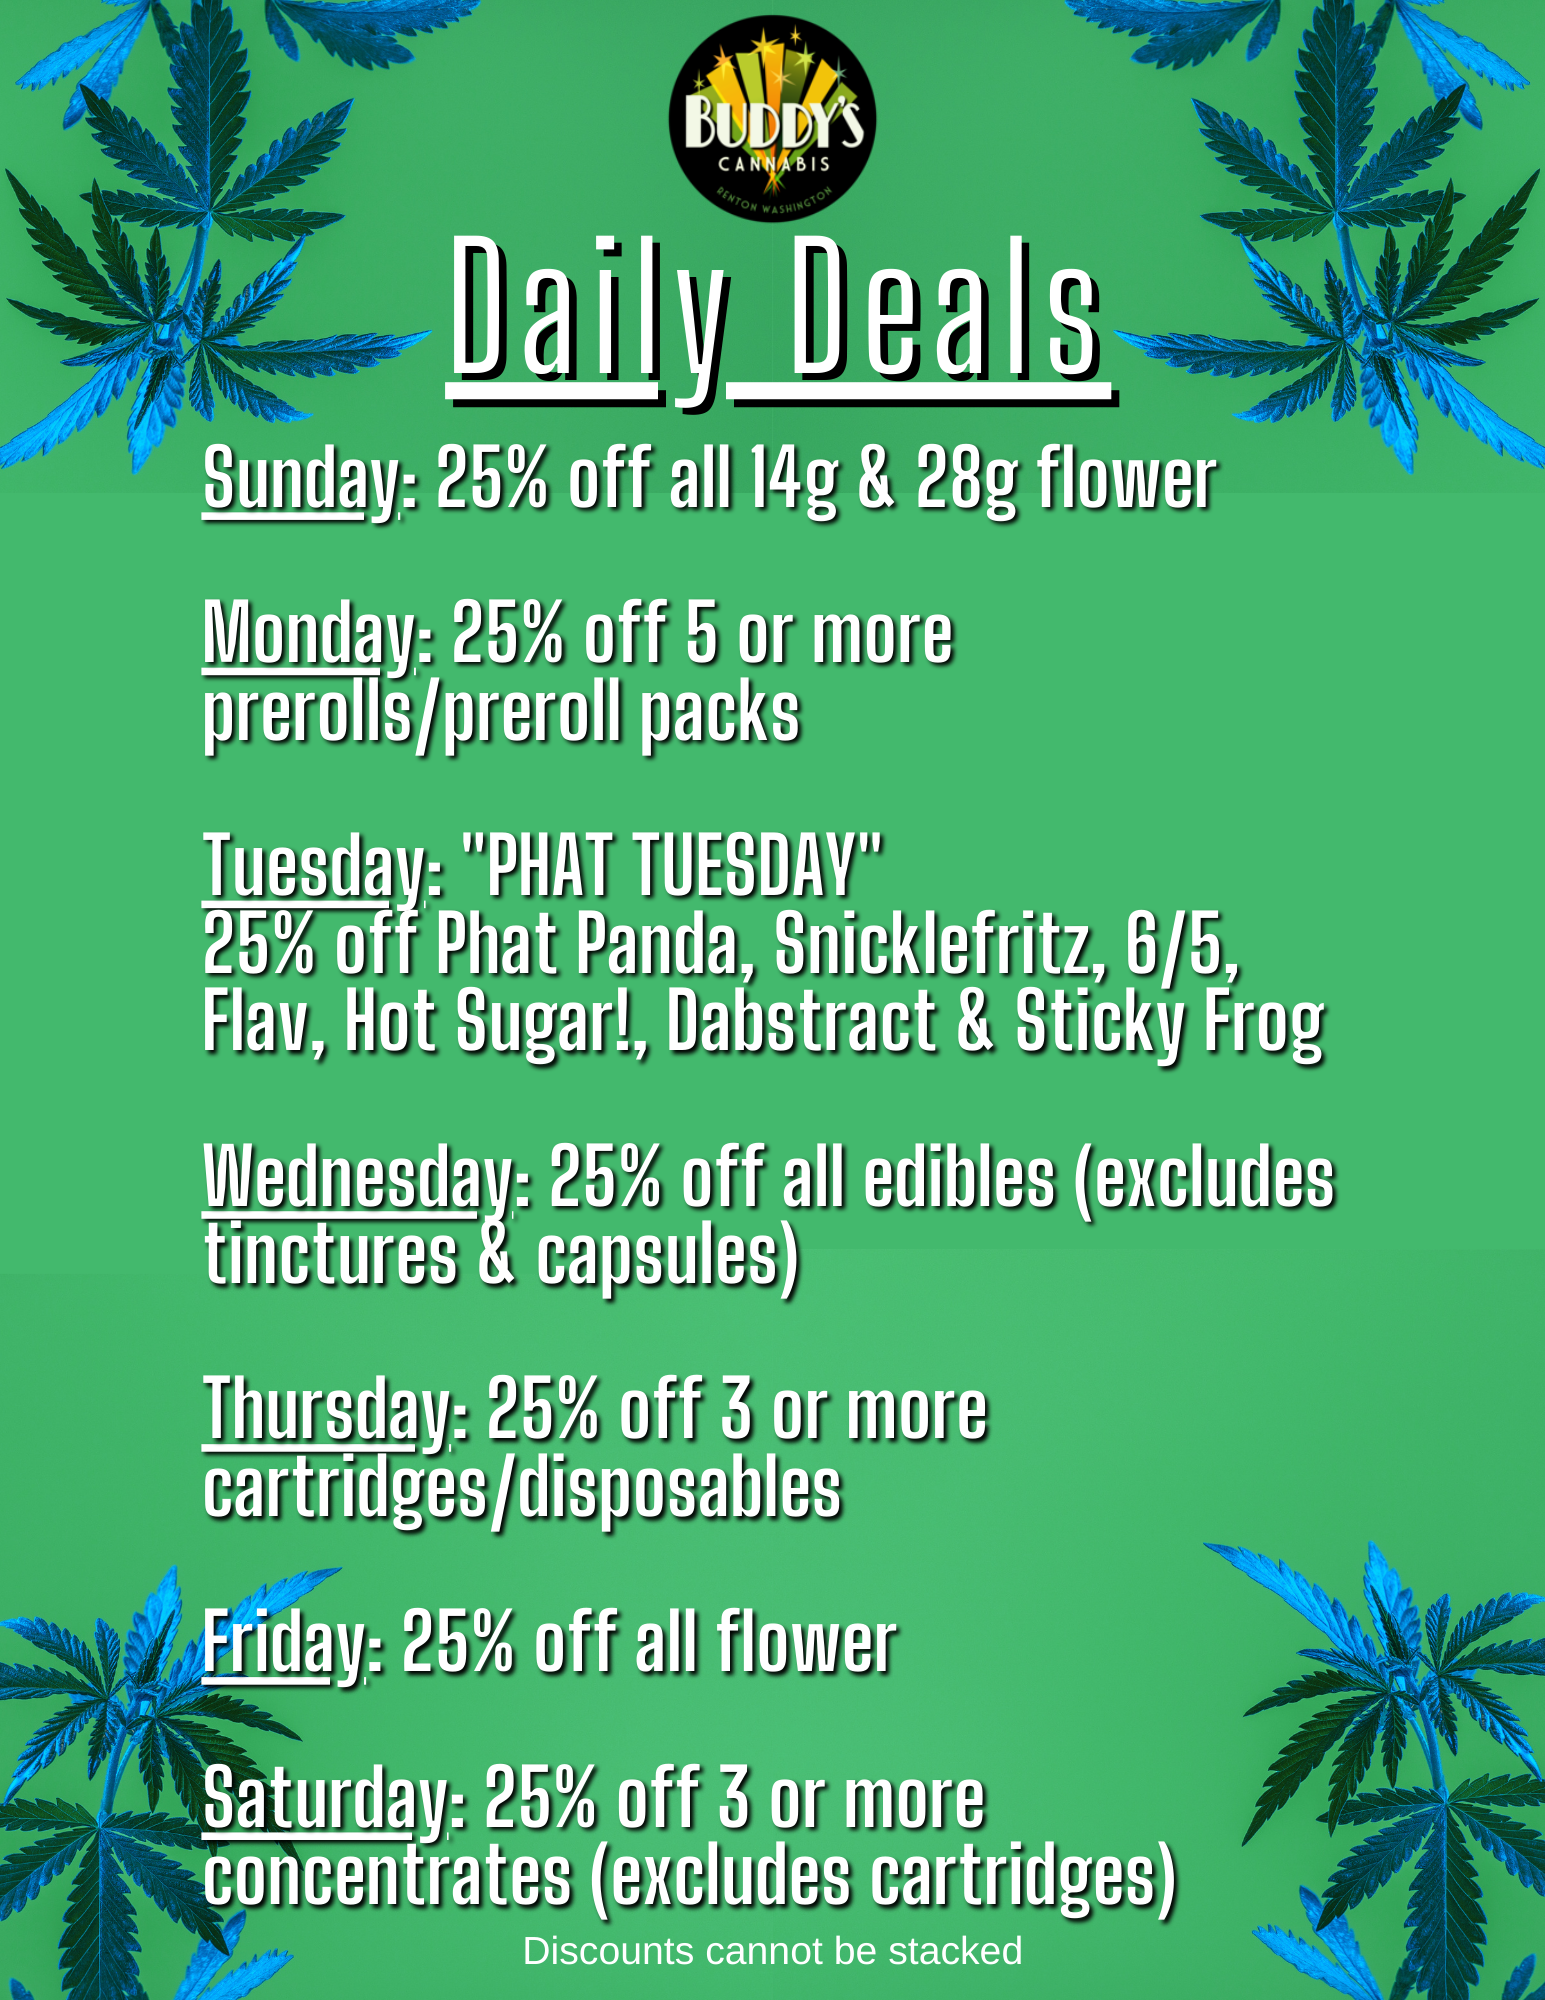 Daily Deals - Buddy's